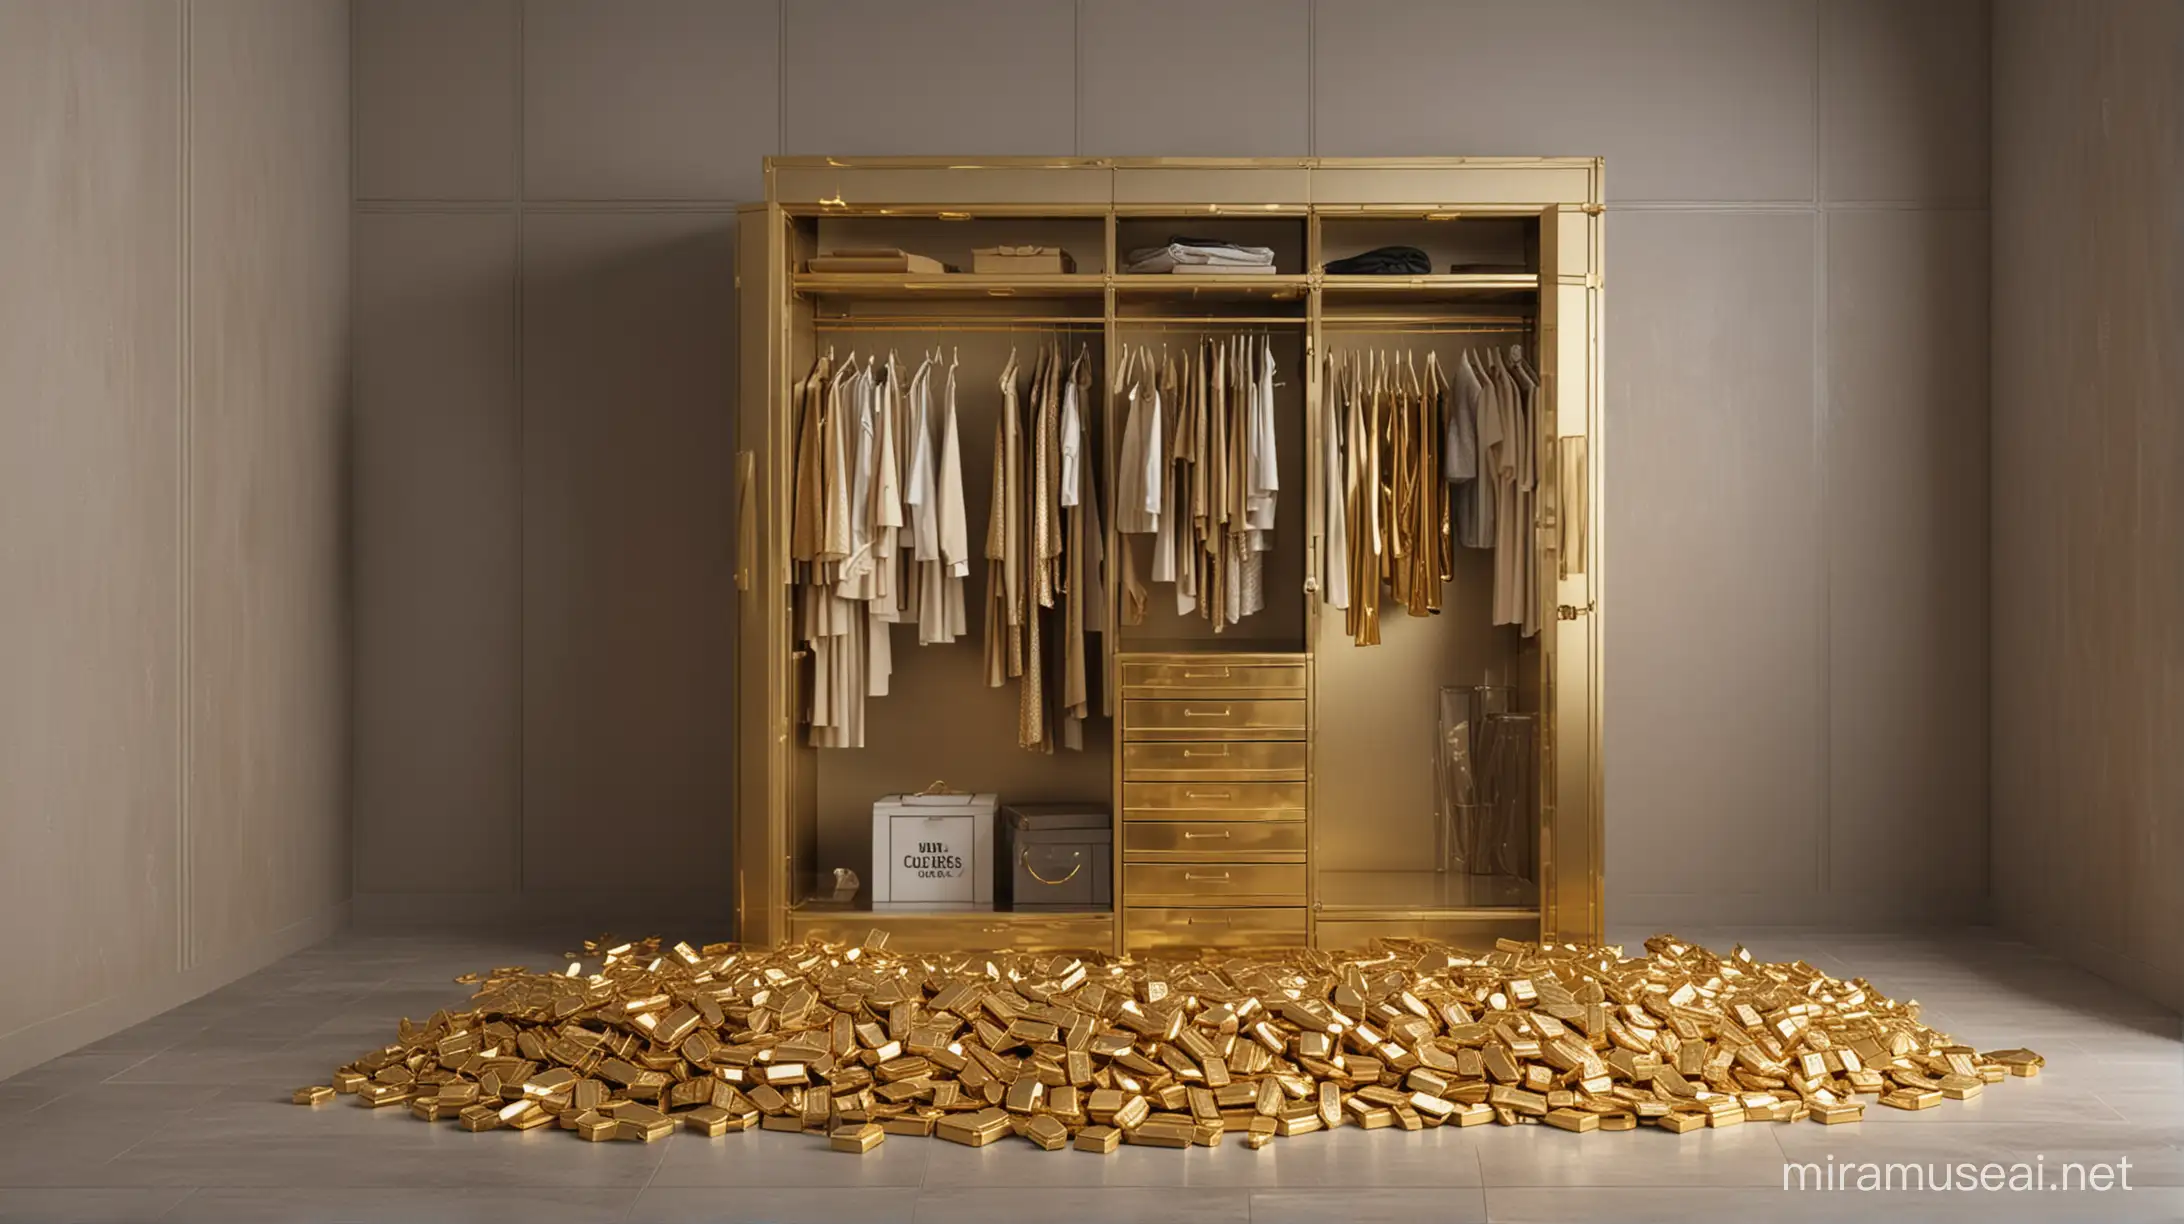 Big closet with few clothes, stashed with gold bars, with some gold laying on floor